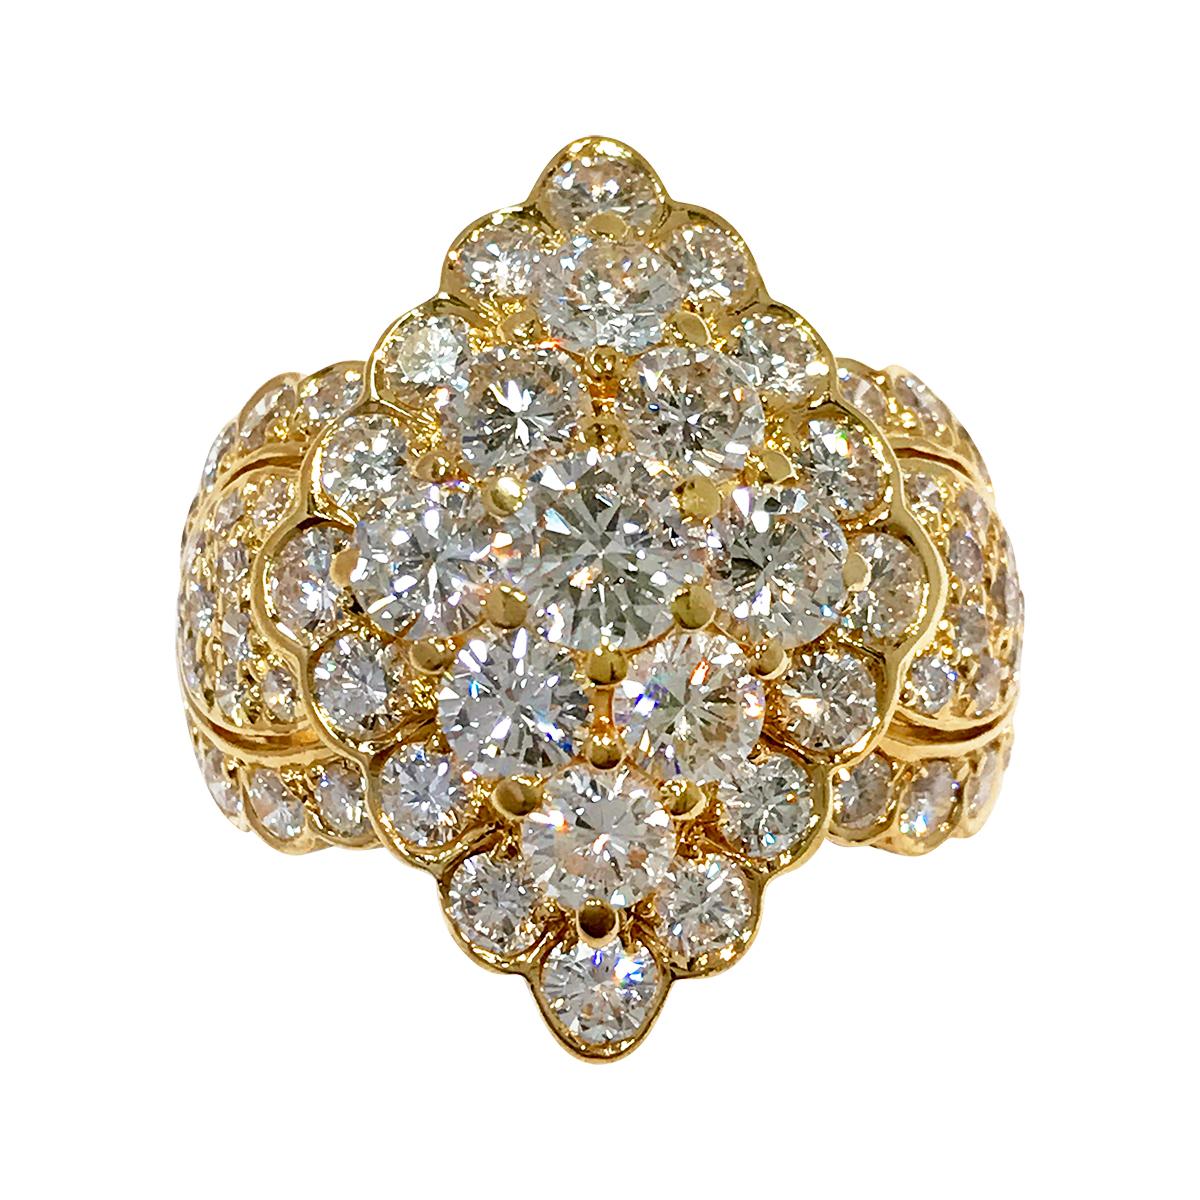 Vintage 18 Karat Yellow Gold Diamond Cluster Cocktail Ring. This dazzling ring features sixty-one (61) round diamonds, prong and bezel set creating a diamond-shaped pattern. The total carat weight of the diamonds is 4.20ctw. The diamonds are VS1-VS2